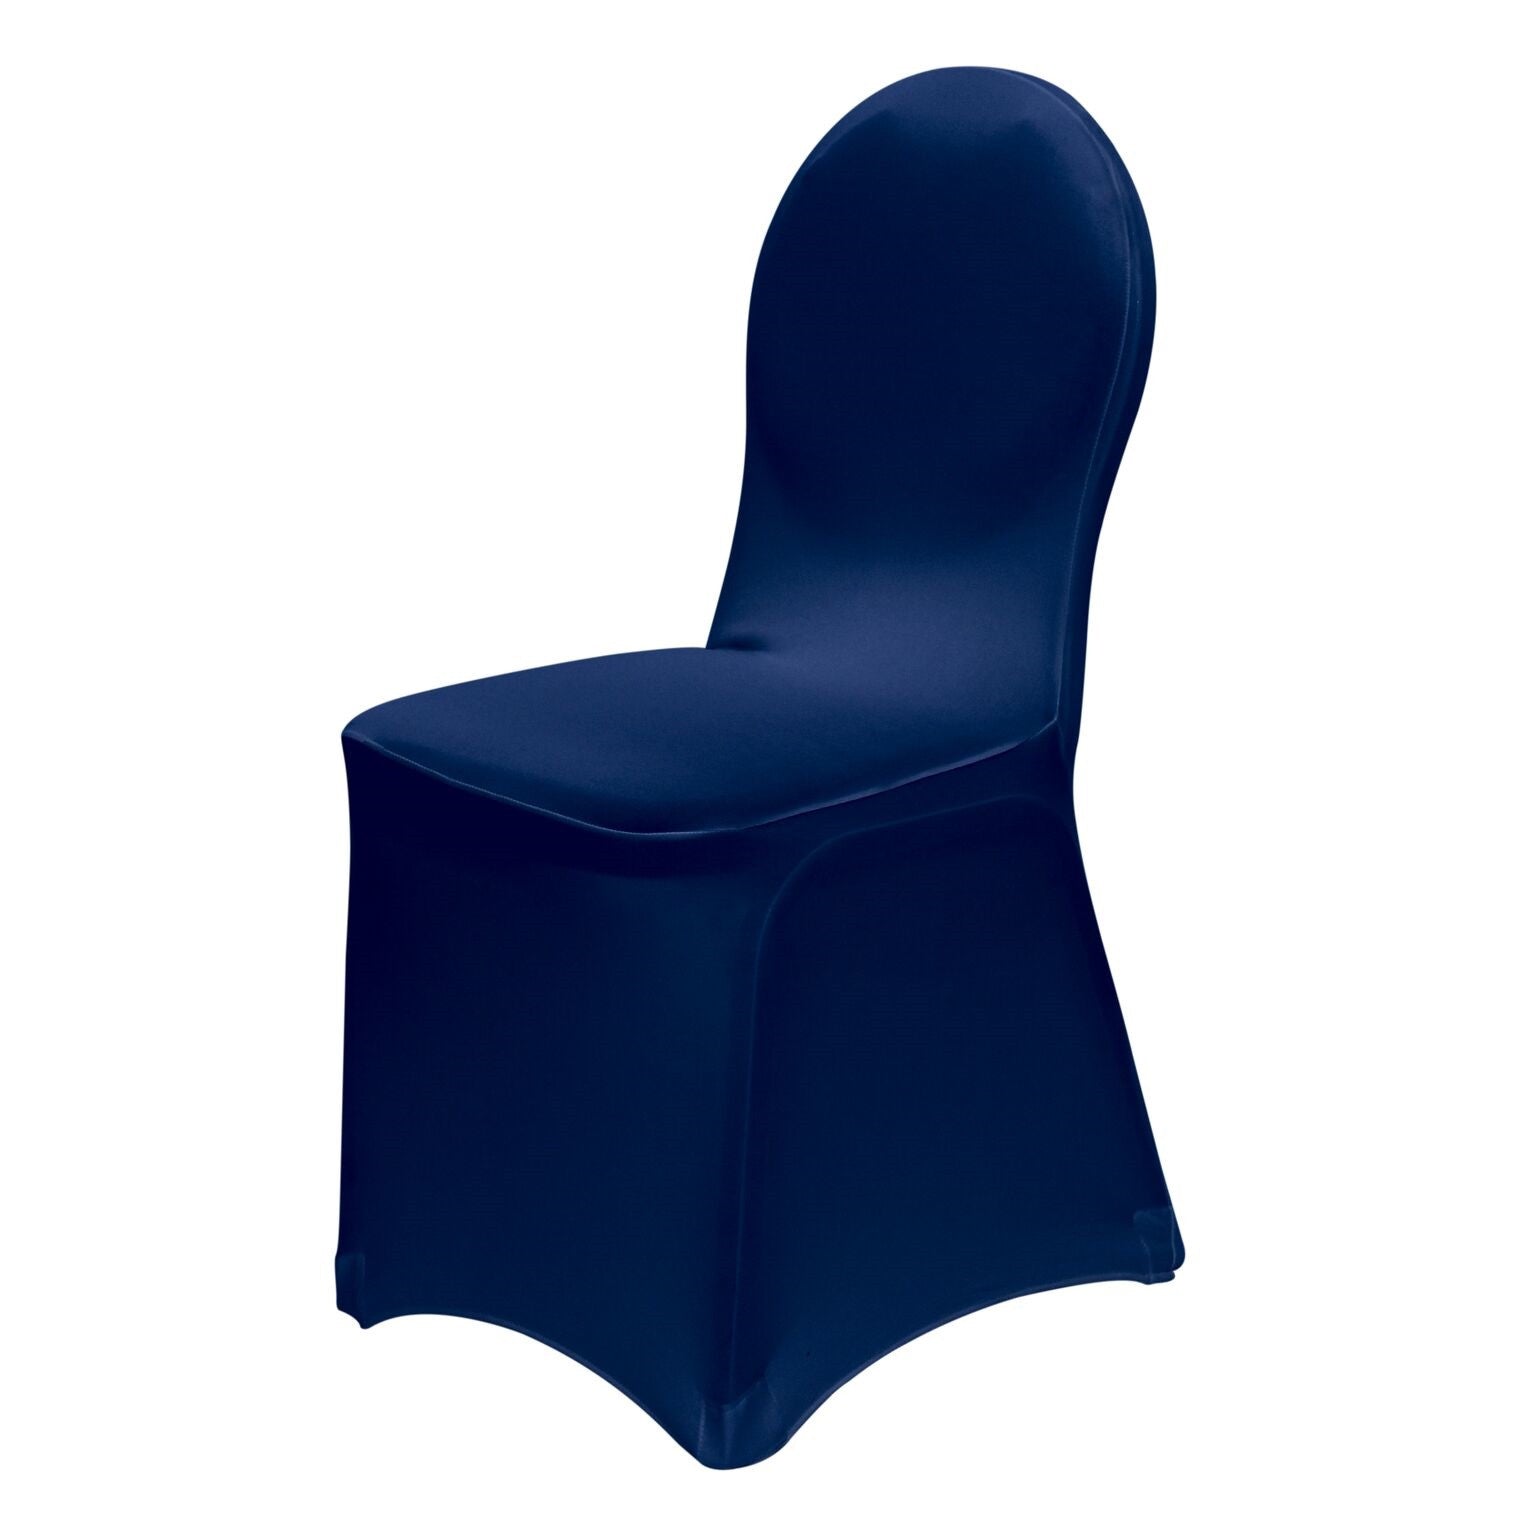 Buy Banquet Chair Cover - Made Of Spandex Cloth 